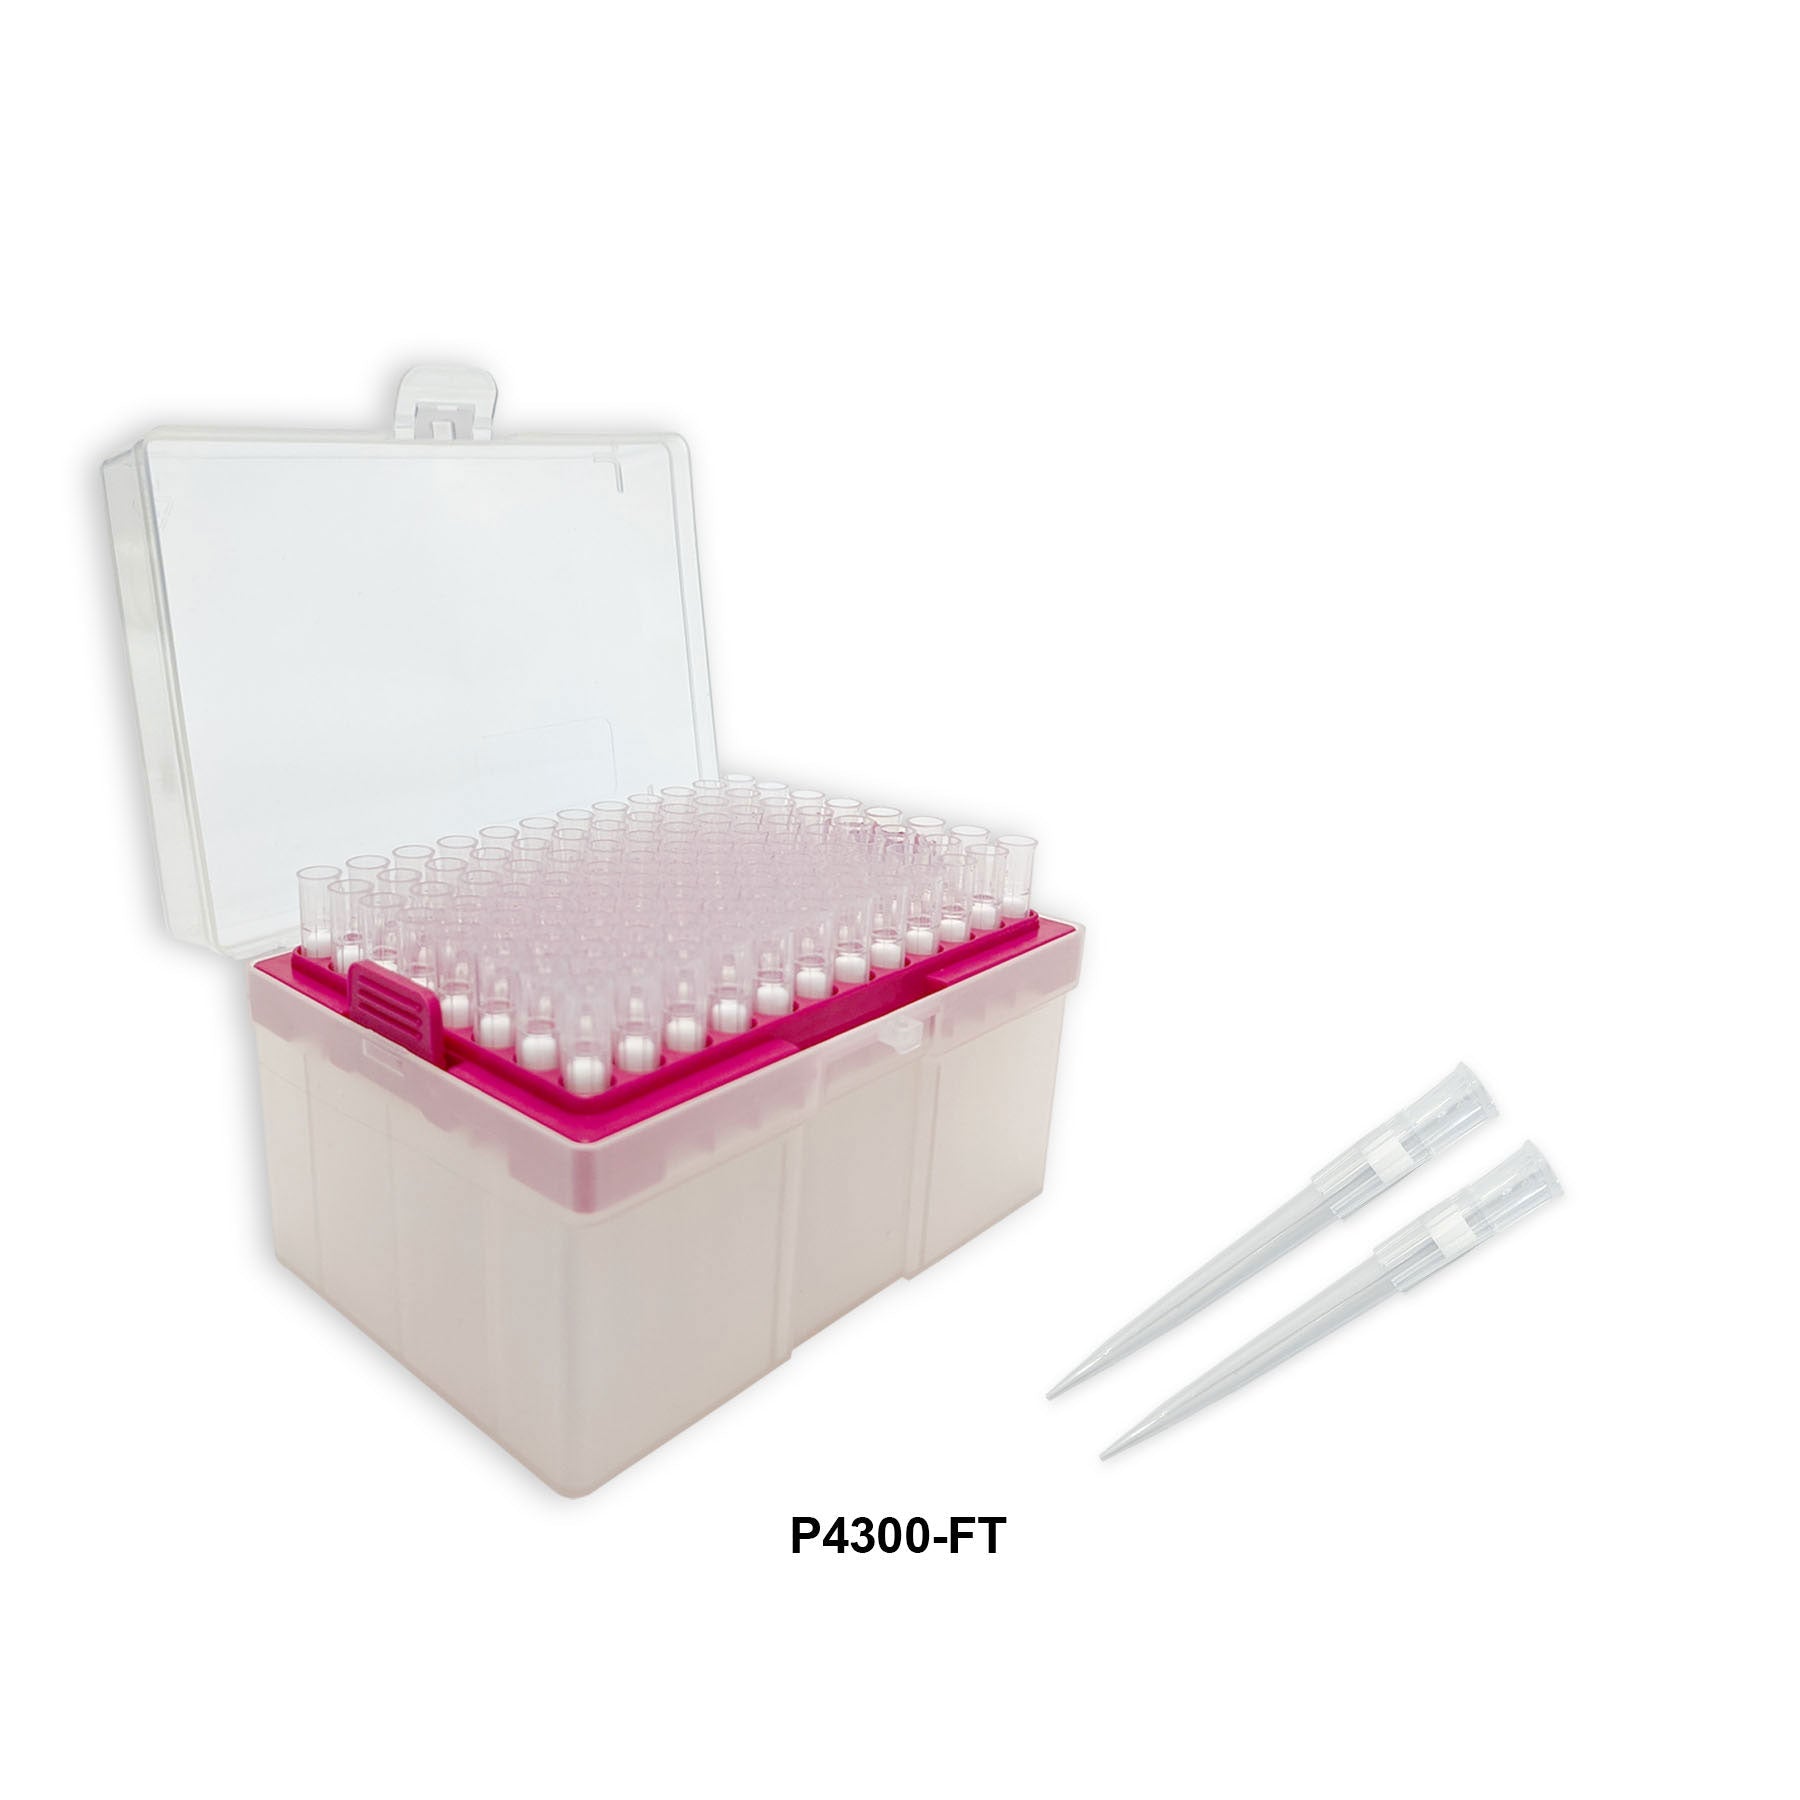 MTC Bio P4300-FT, Pipette Tips, Filtered, 300µl Capacity, Sterile, for 200µl and 300µl Pipettes, 10 Racks of 96 Tips